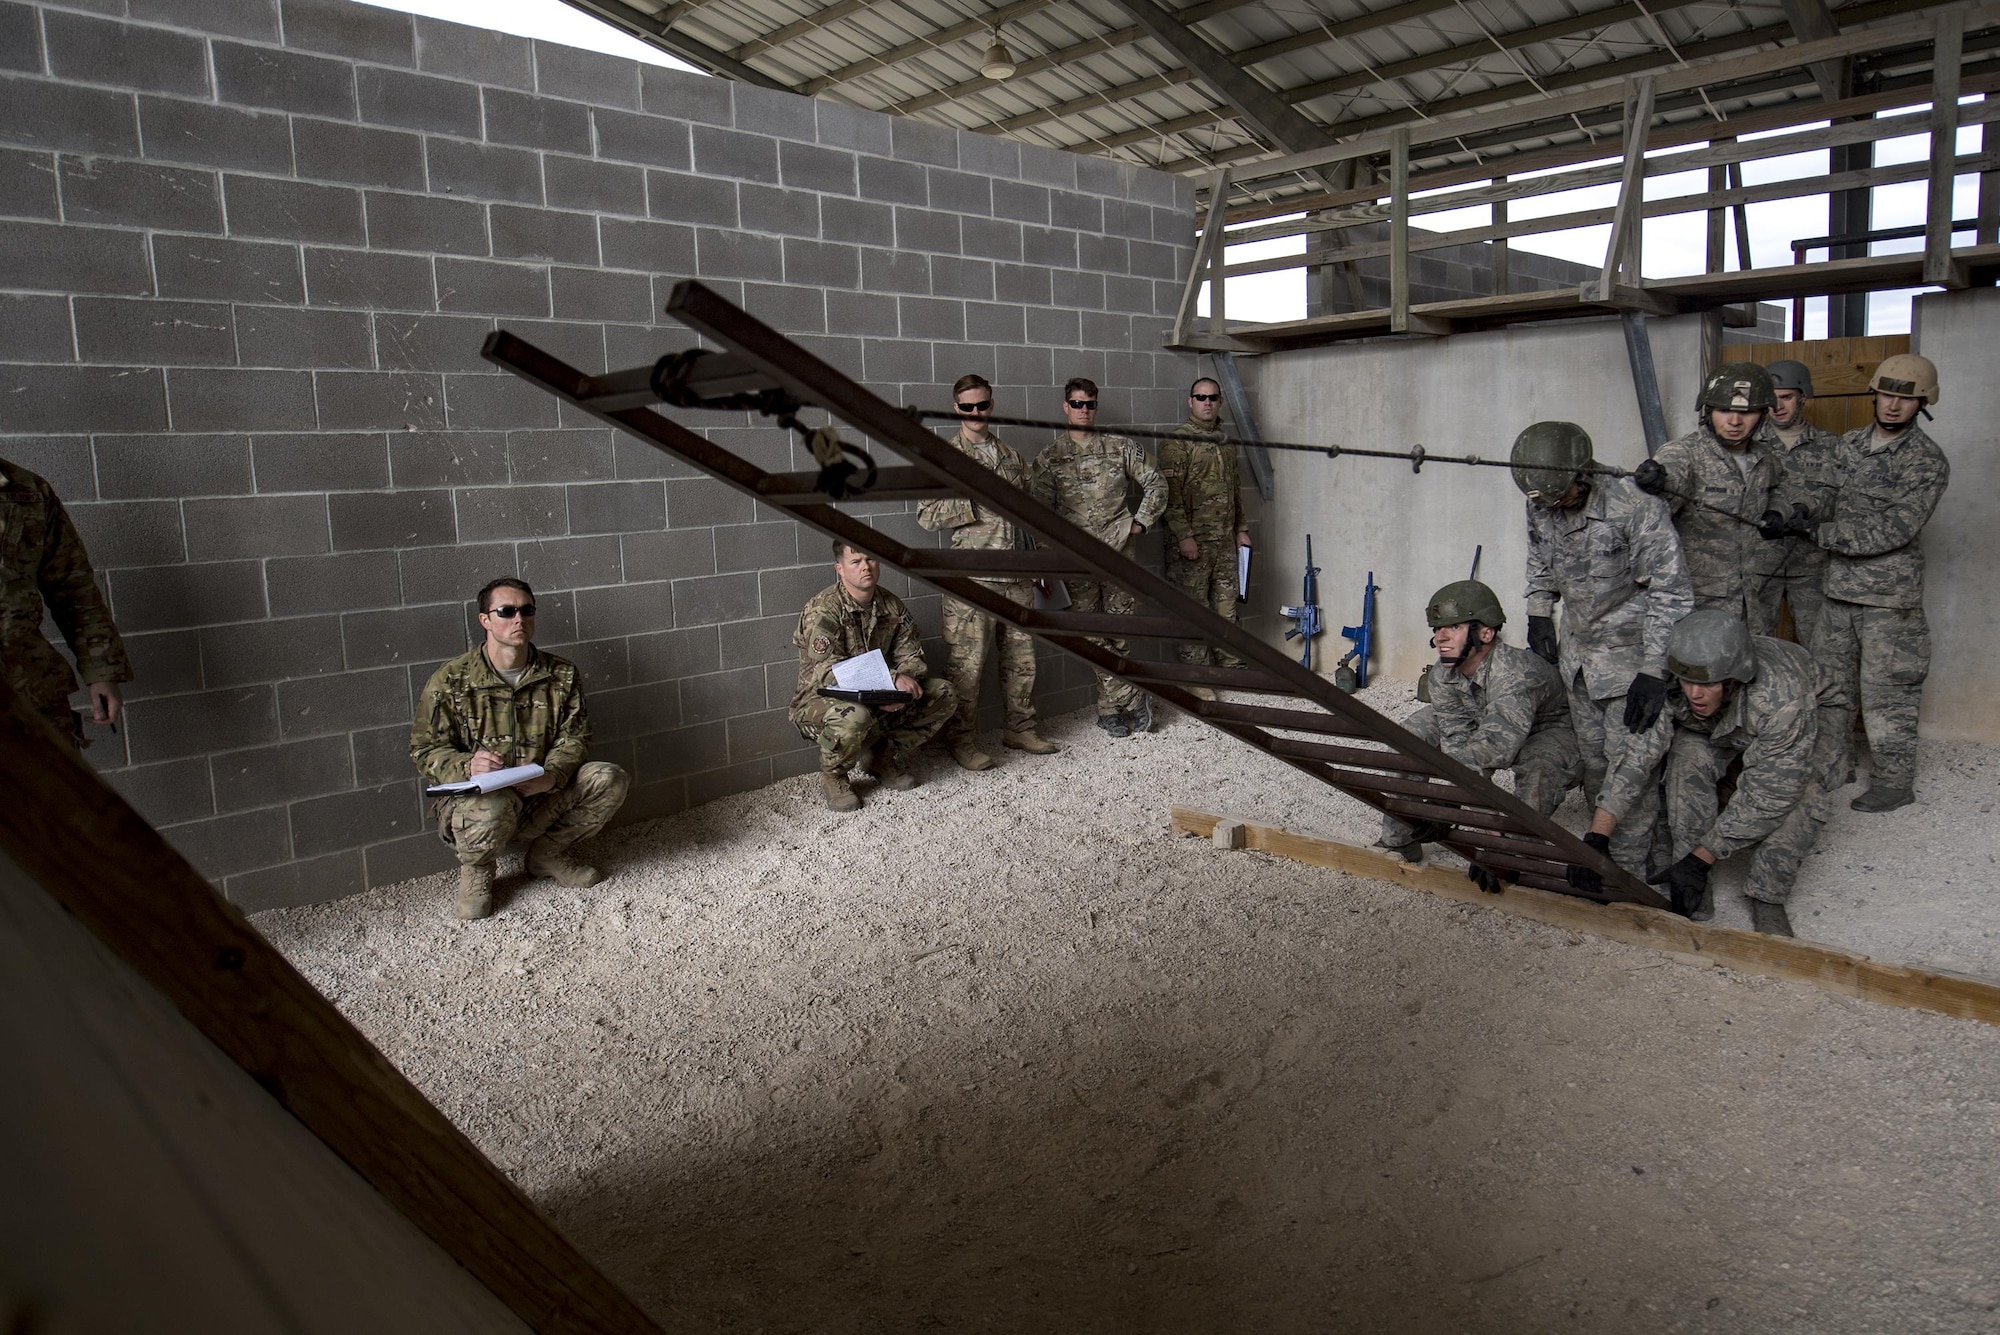 Air Force Academy Cadets work to complete a tasked obstacle during an Air Liaison Officer Aptitude Assessment, Feb. 14, 2017, at Camp Bullis, Texas. The cadets were forced to use critical thinking skills to complete tasked obstacles as a team. (U.S. Air Force photo by Airman 1st Class Daniel Snider)